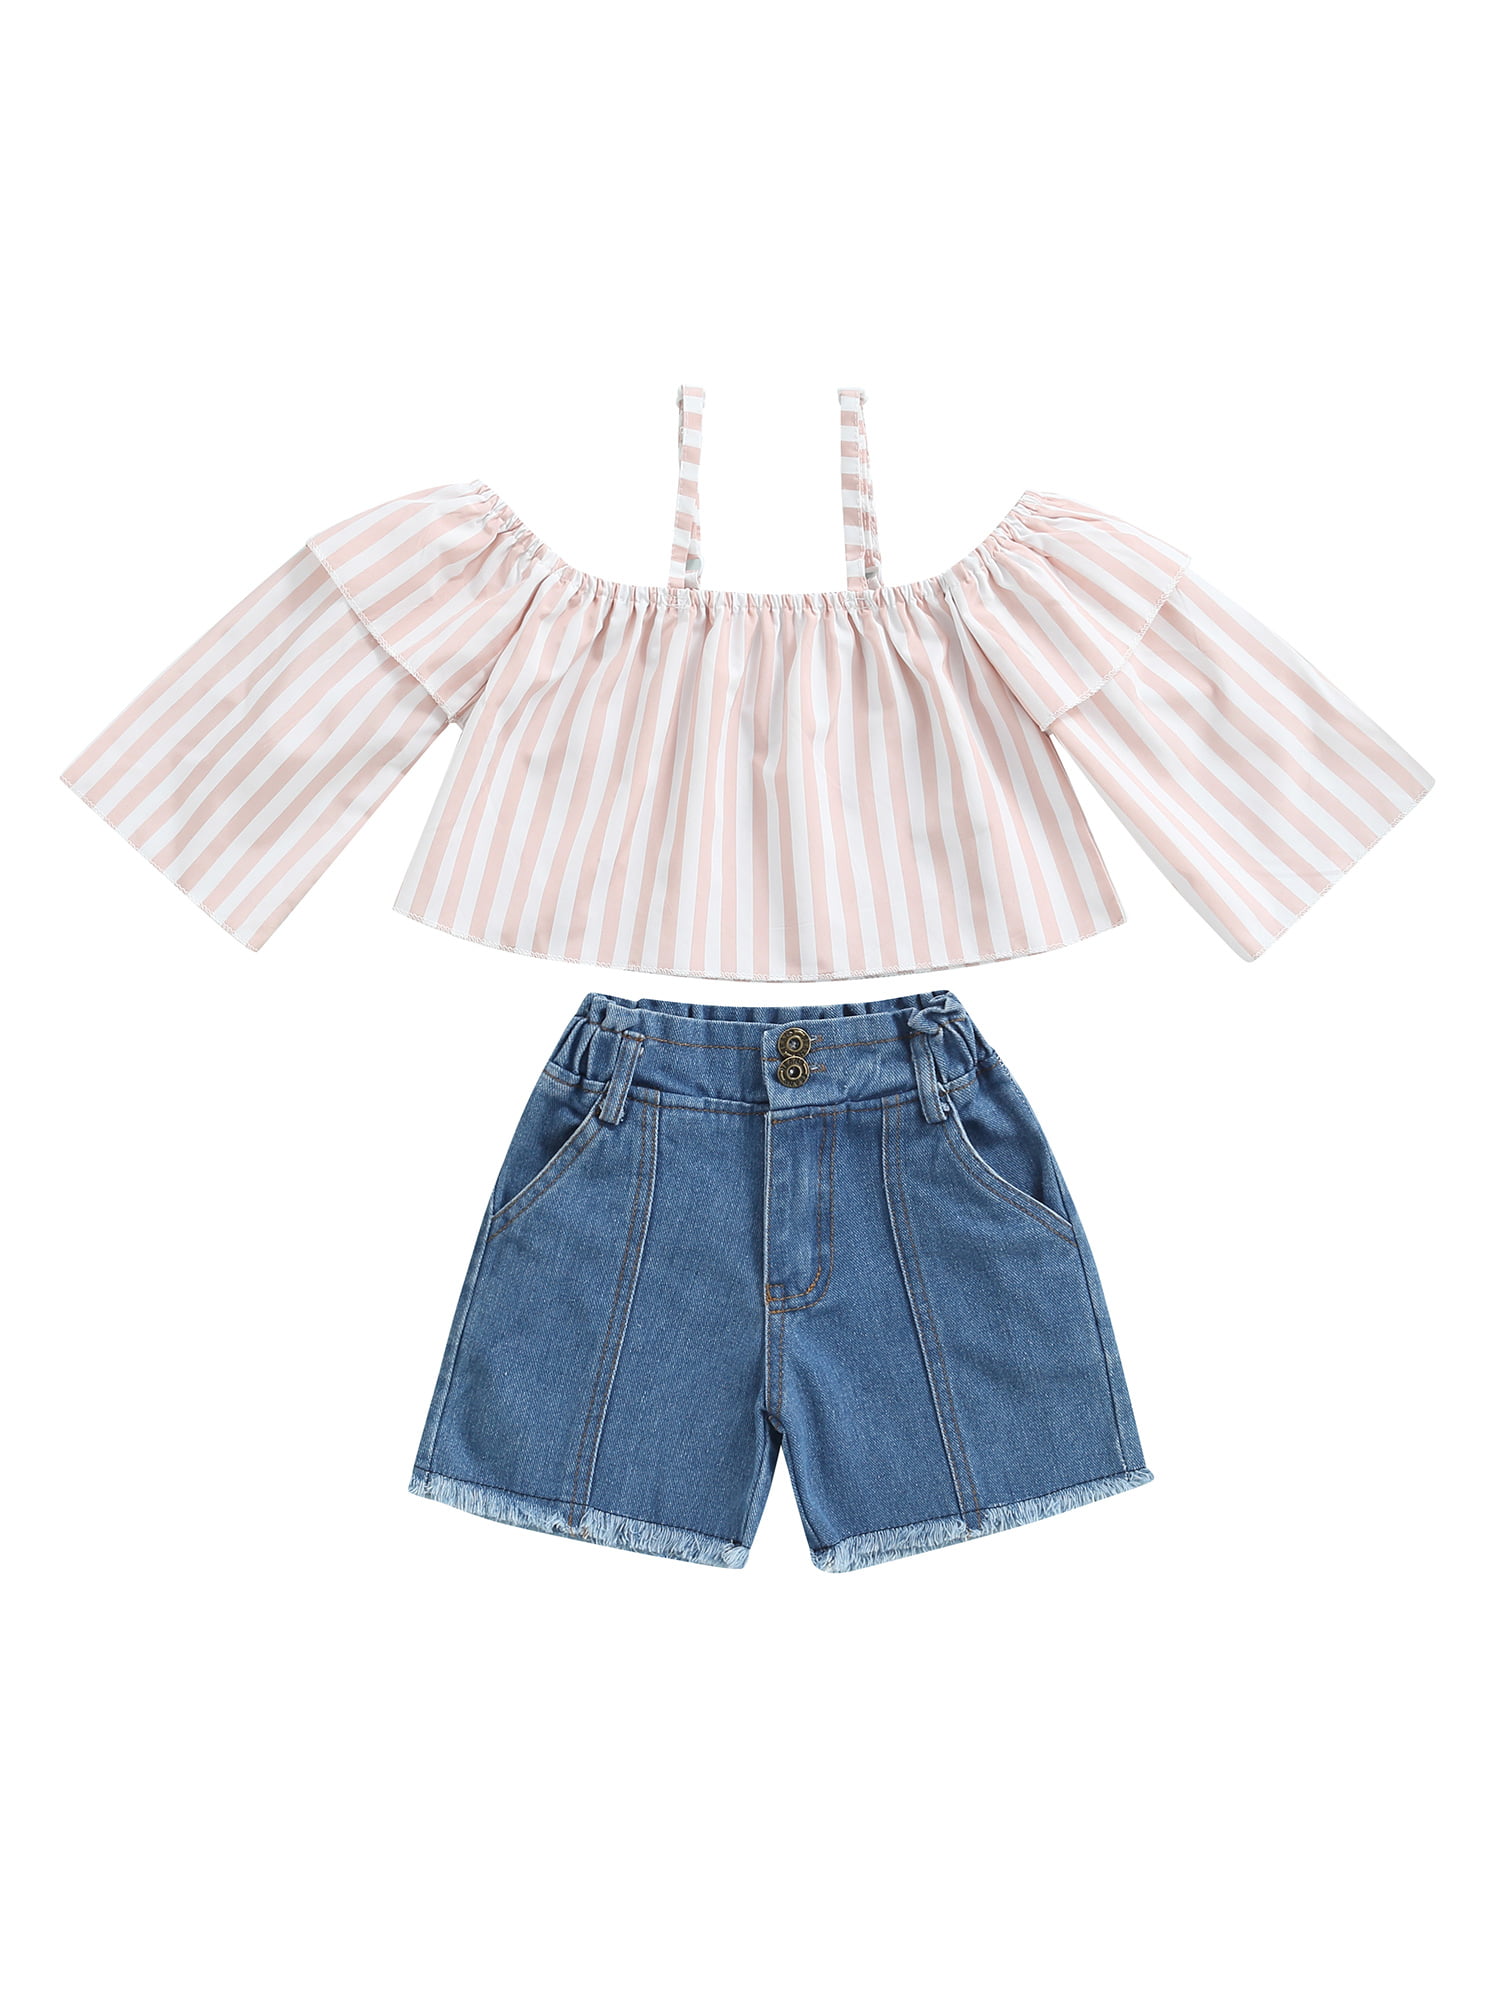 2Pcs Little Girl Summer Outfits Set Striped Sling Top Denim Shorts Toddler  Girl Casual Clothes 